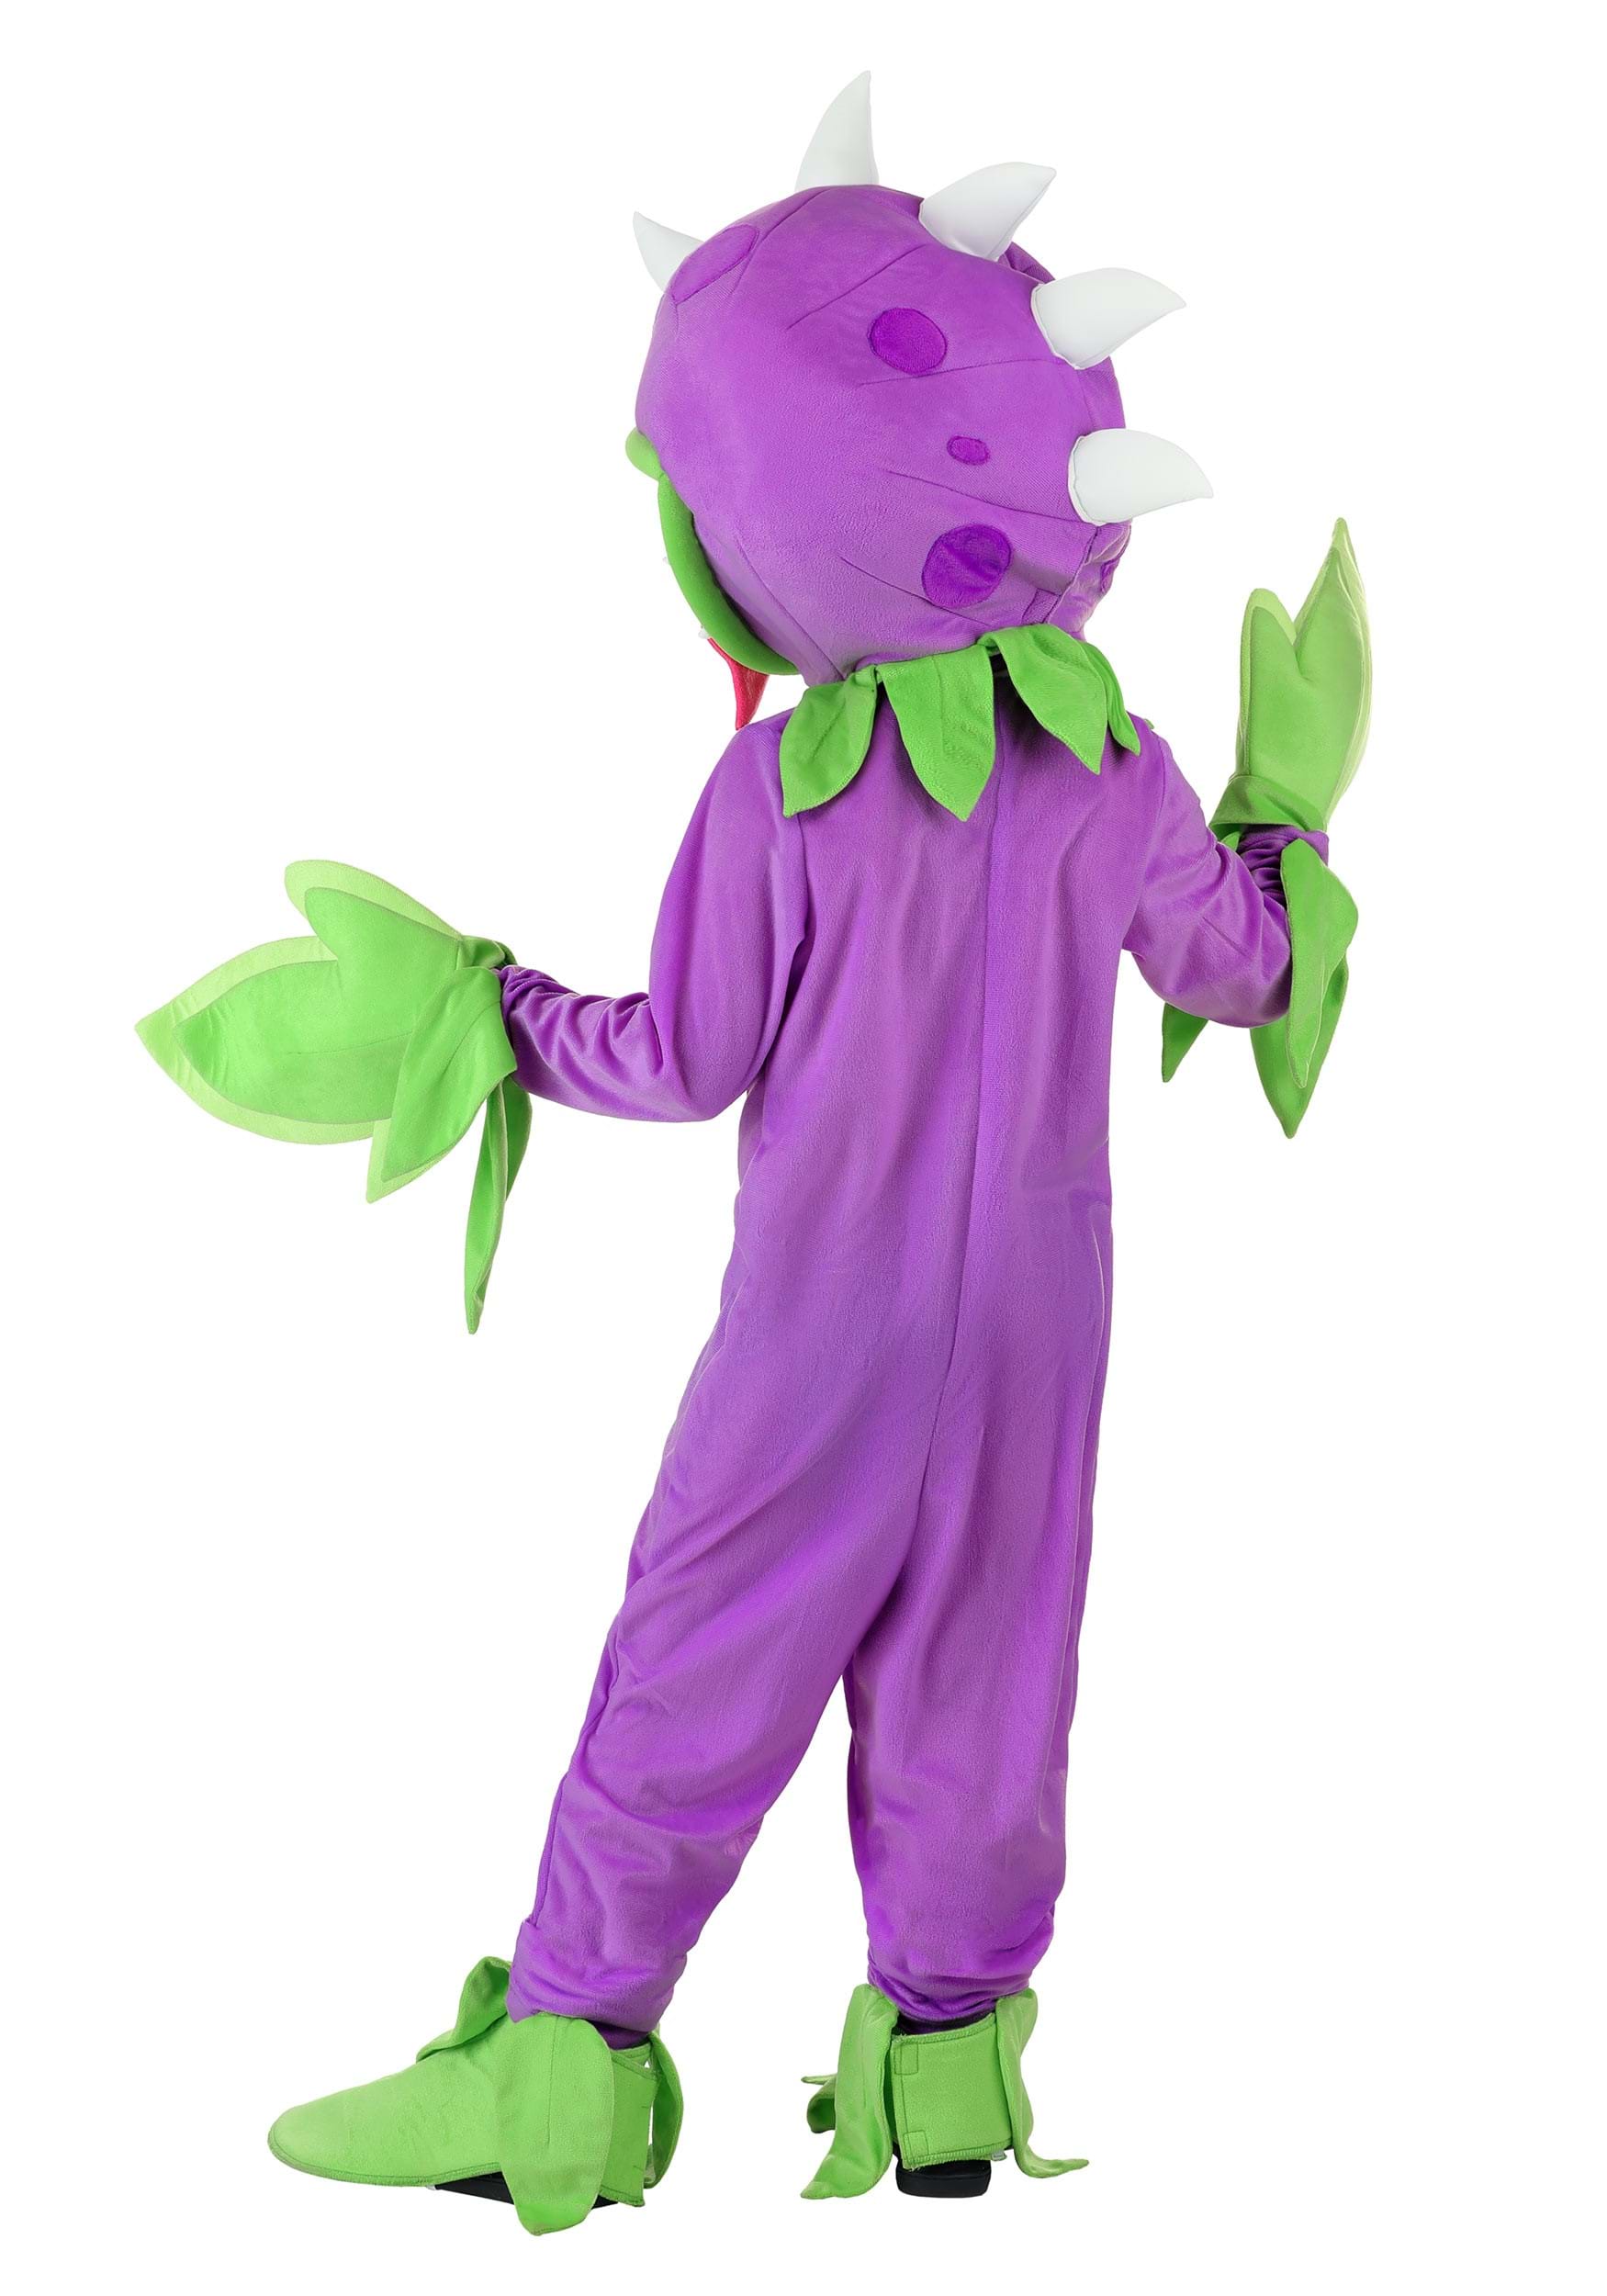 Photos - Fancy Dress VS FUN Costumes Plants  Zombies Chomper Costume for Toddlers Green/Purp 